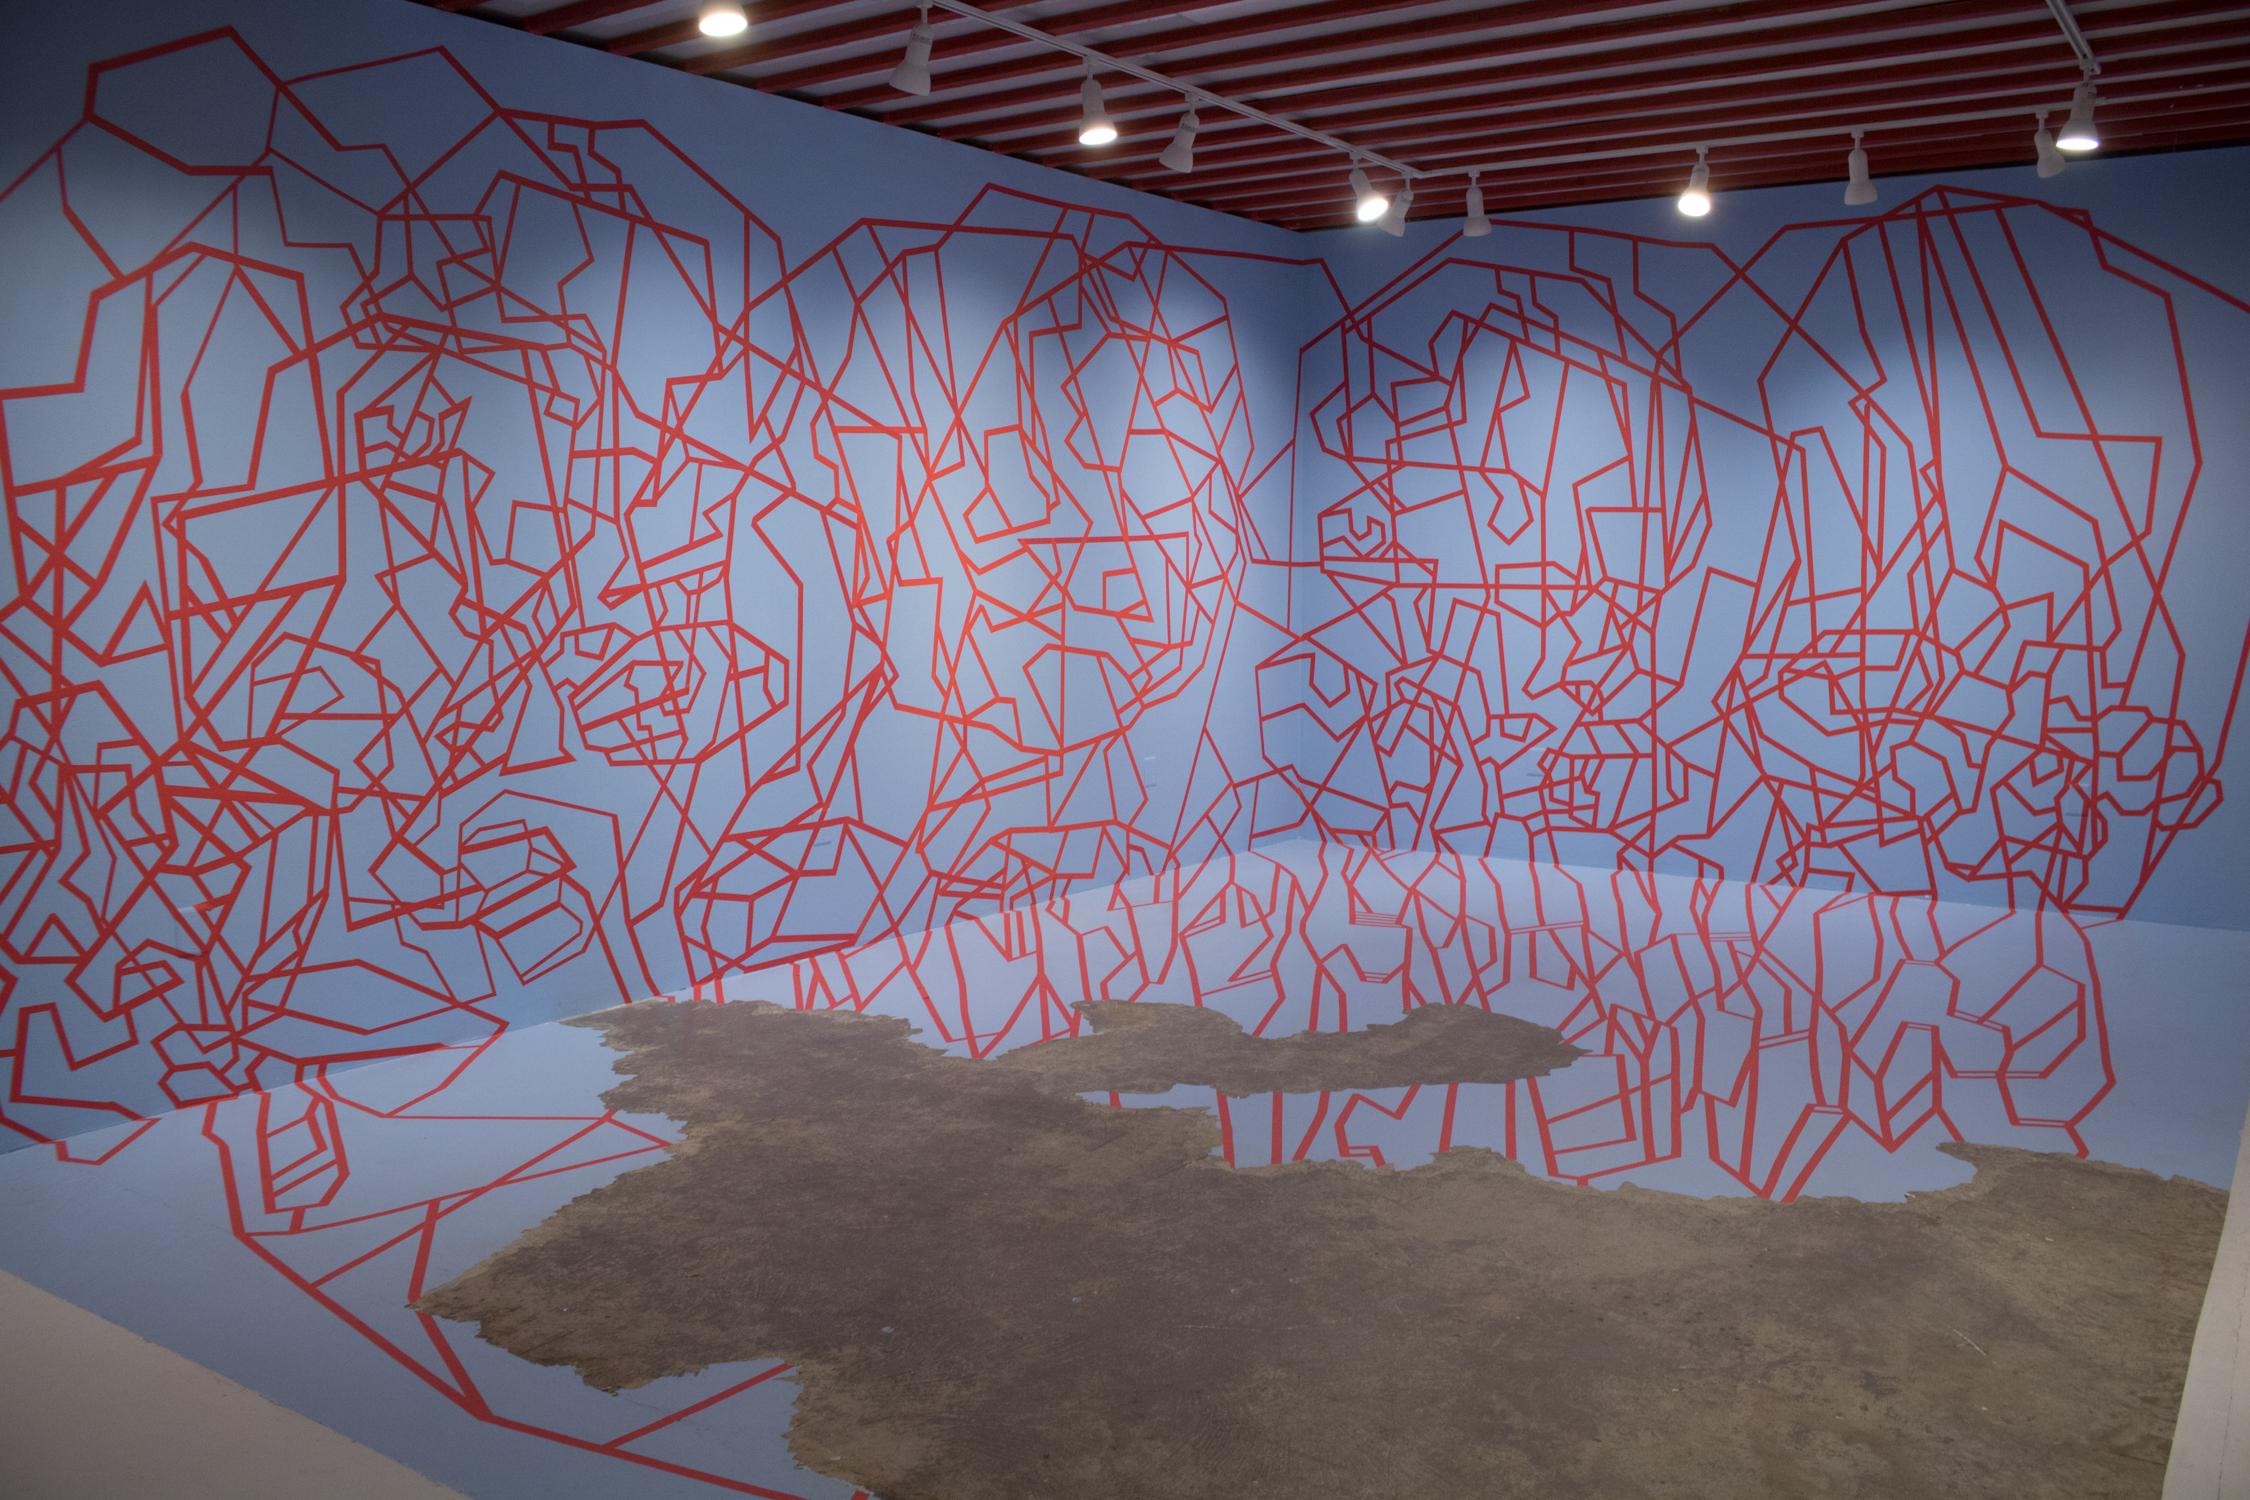 DUSTIN HEDRICK TAPE INSTALLATION - Blue Paint & Red tape - "Cutting Edge" Mural - Mixed Media Art by Dustin Hedrick